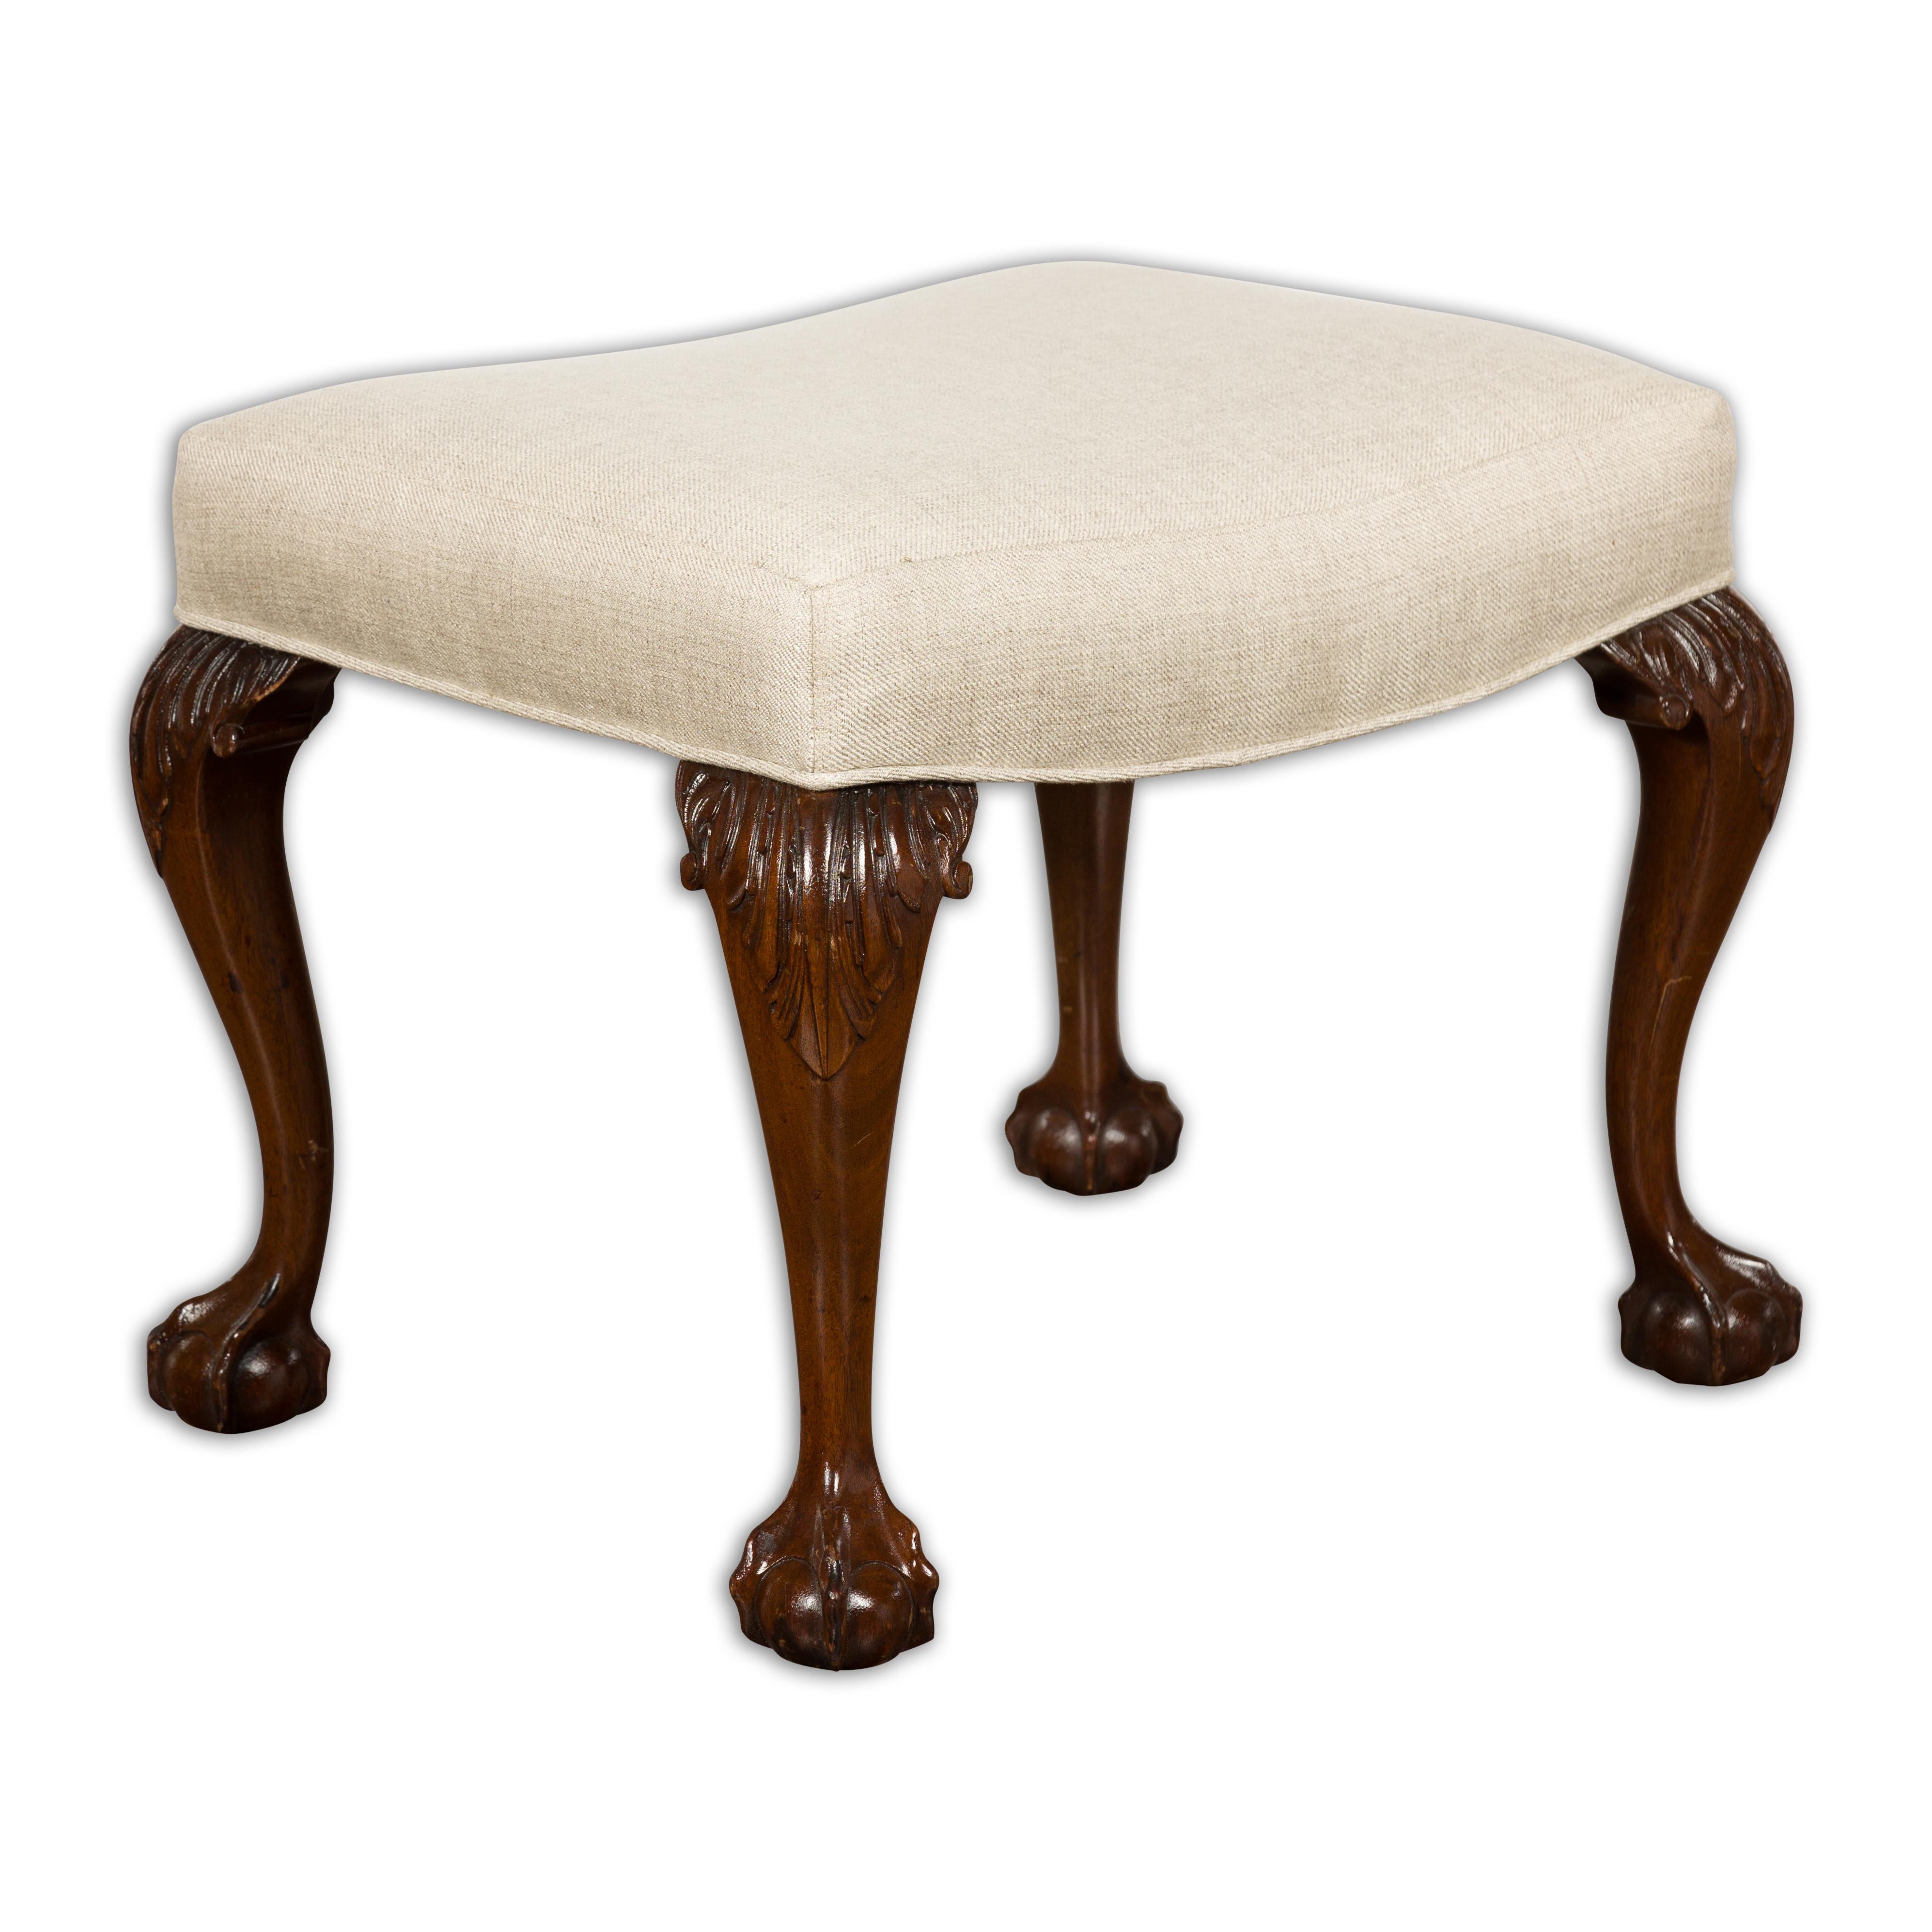 An English mahogany stool from the 19th century with cabriole legs, ball and claw feet and new custom linen upholstery. Exuding an air of stately English elegance, this 19th-century mahogany stool captures the essence of refined craftsmanship and